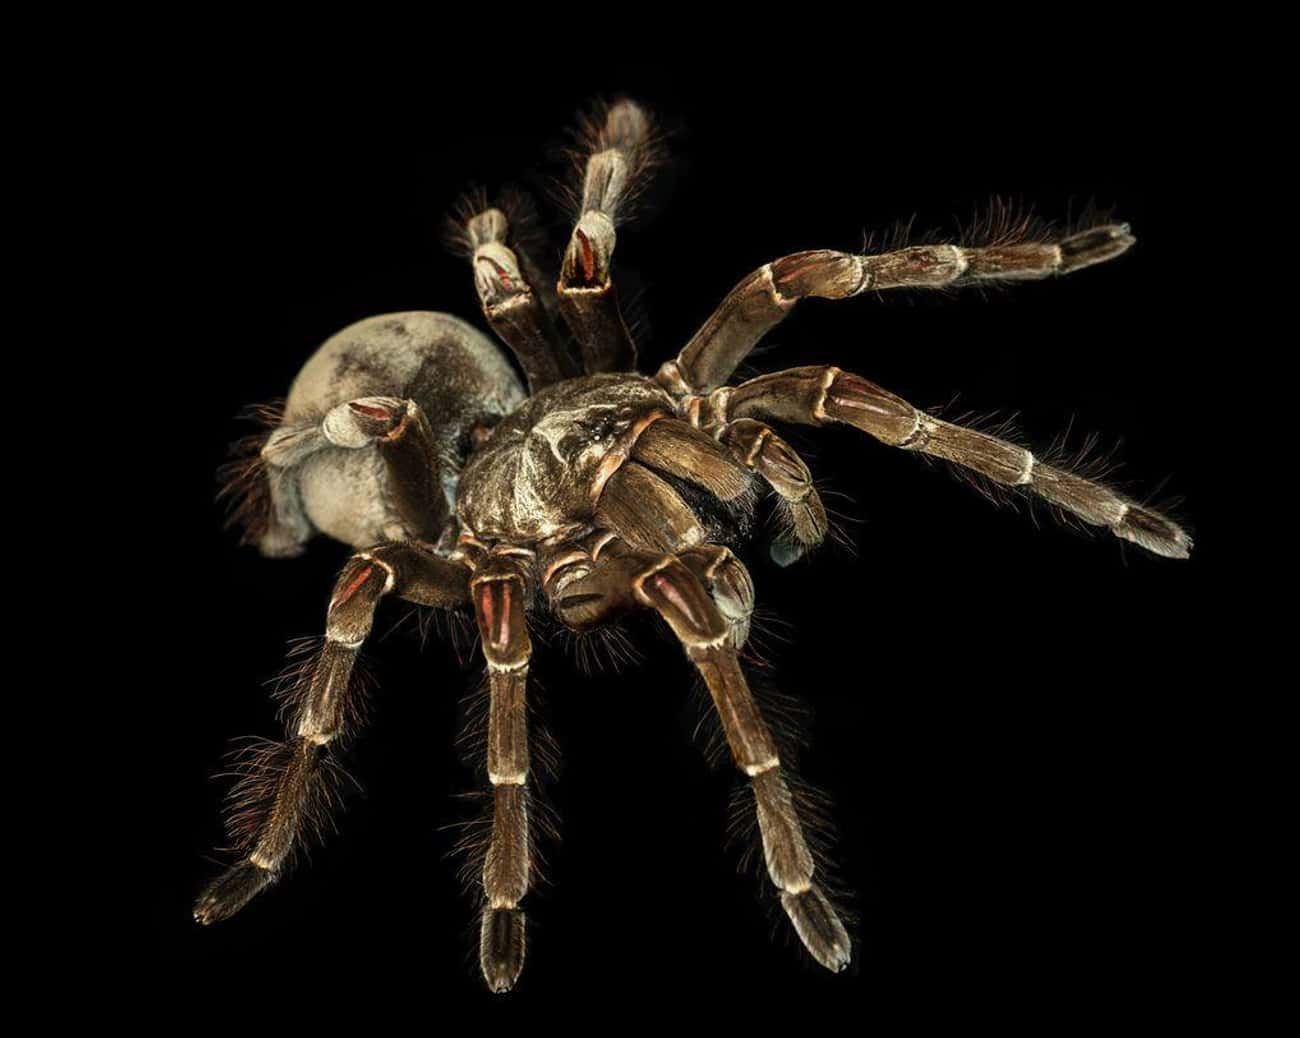 They Can Regenerate Lost Limbs Through A Molting Process